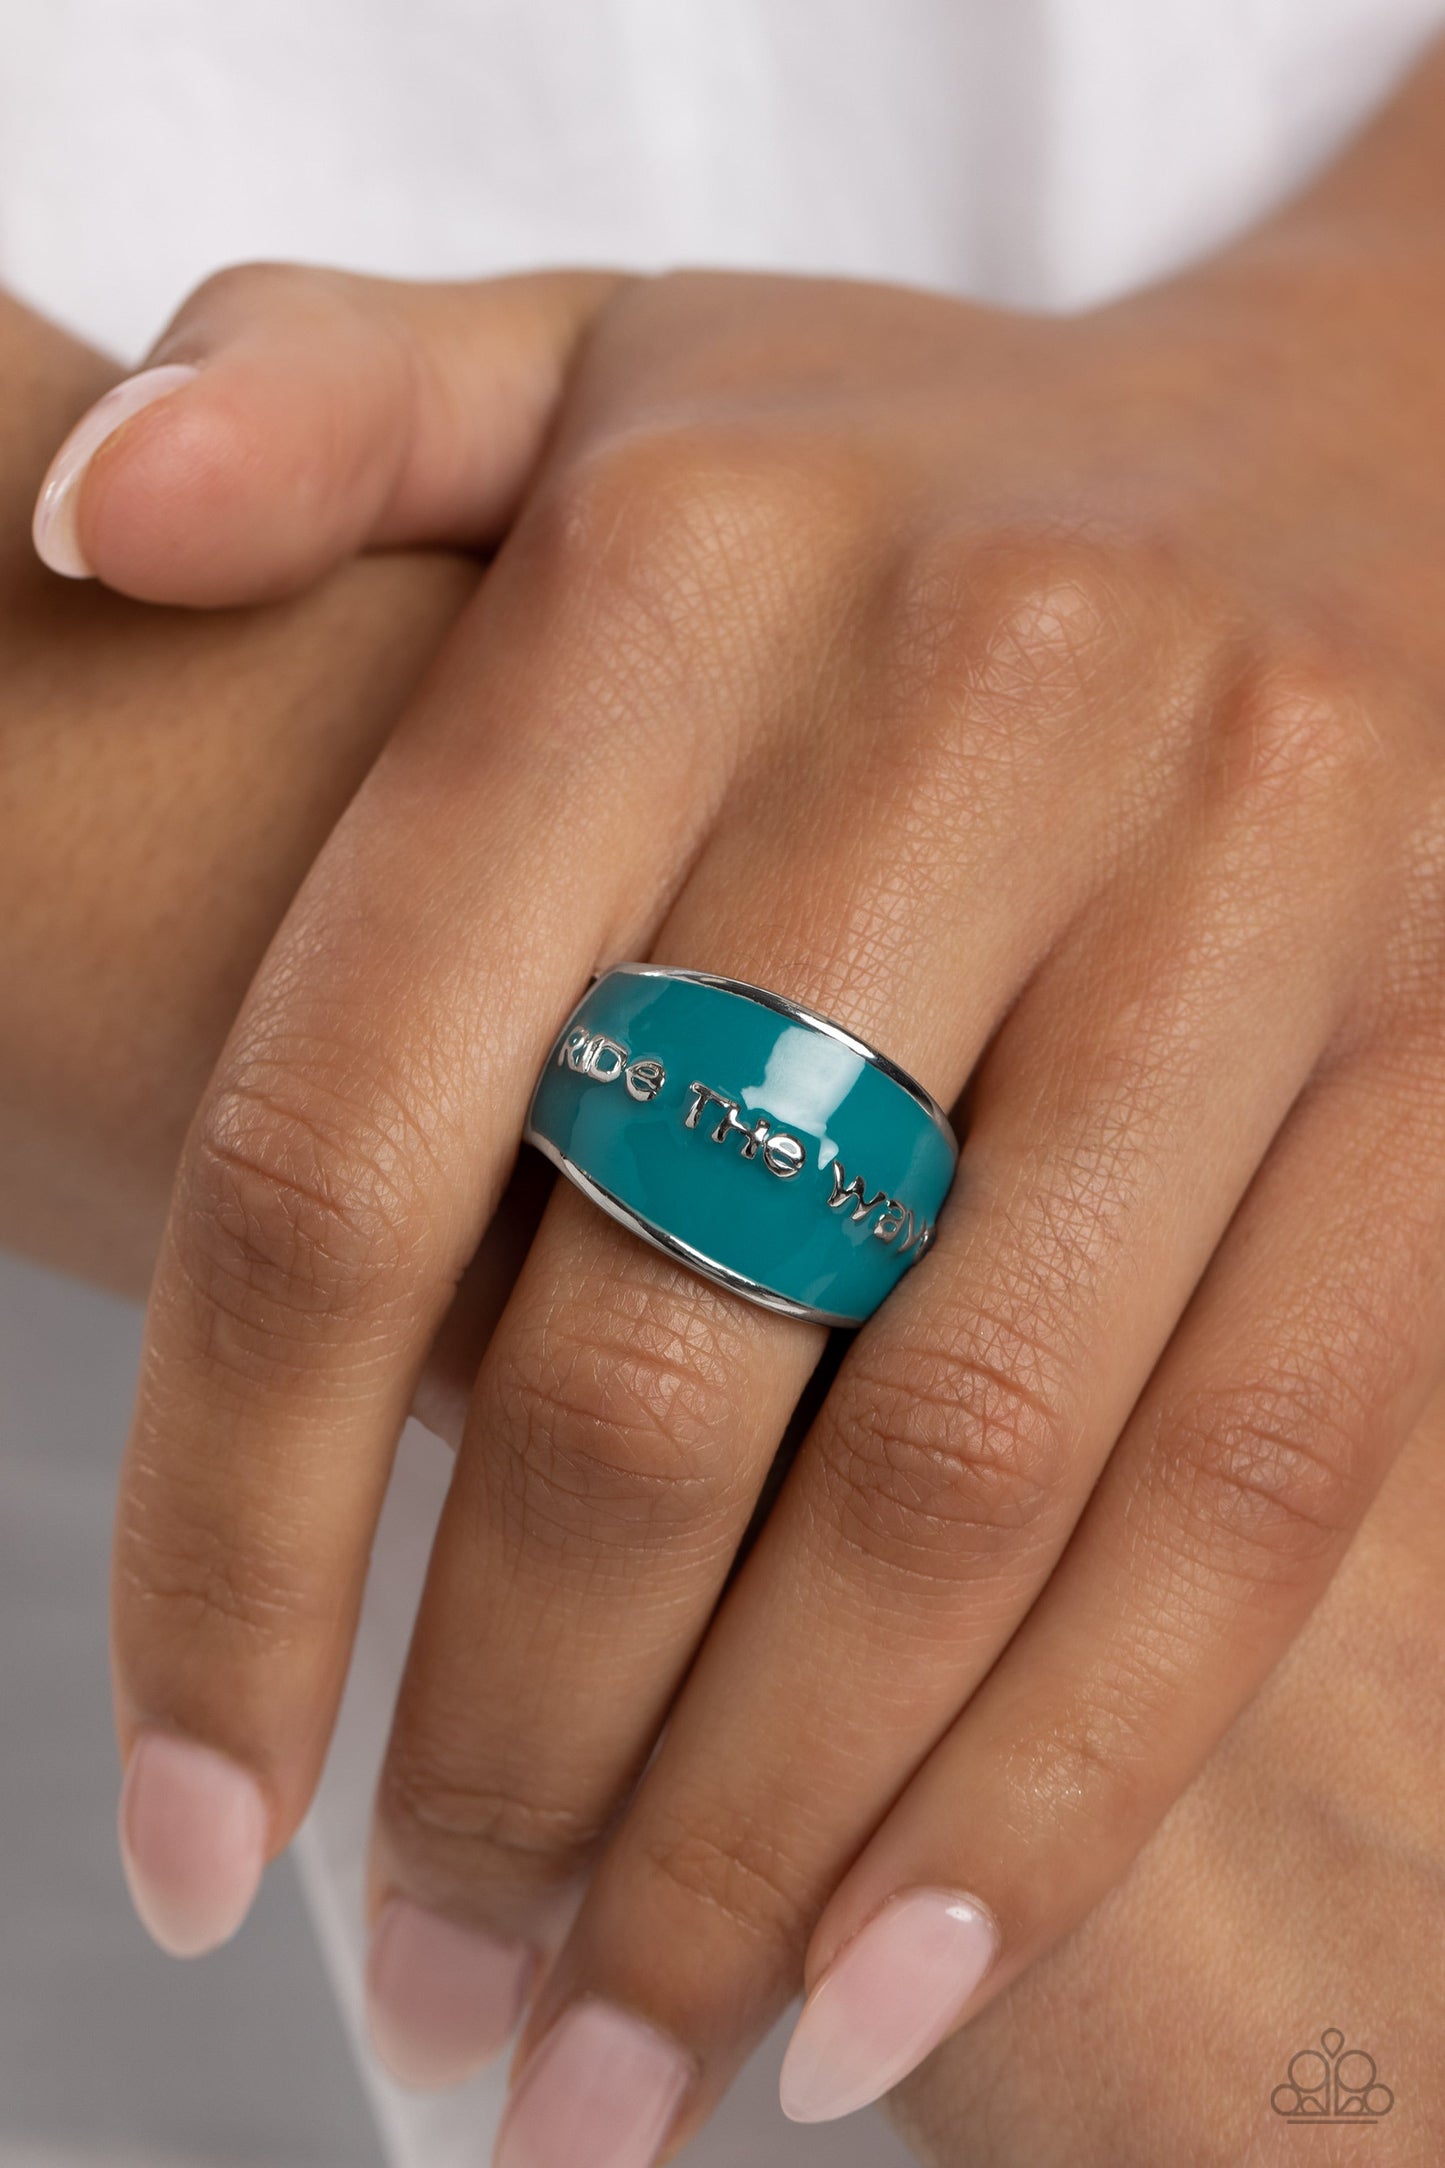 West Coast Waves - Blue Paint & Silver "ride the wave" Stamped Paparazzi Ring